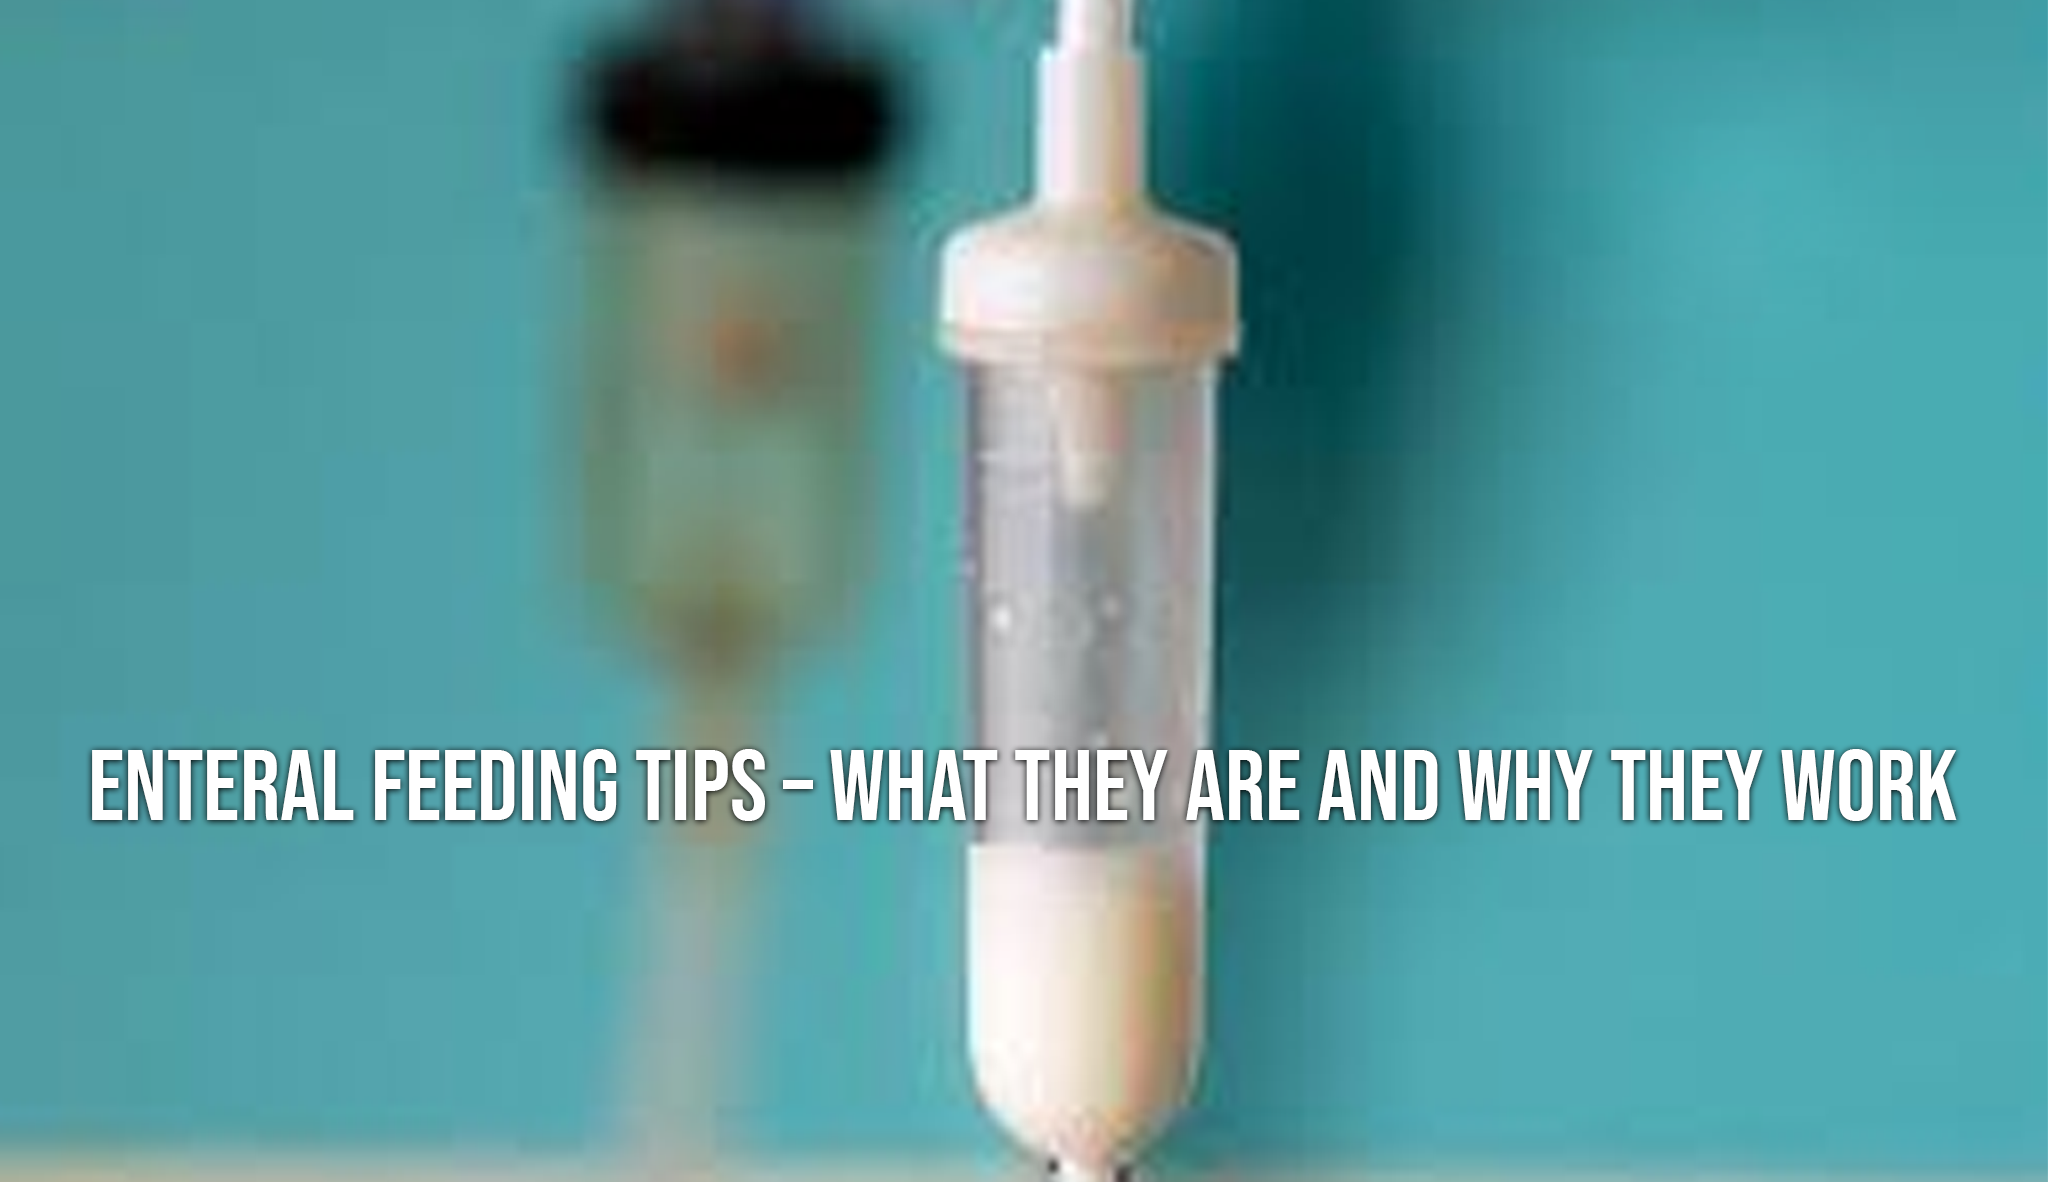 Enteral Feeding Tips - What They Are And Why They Work